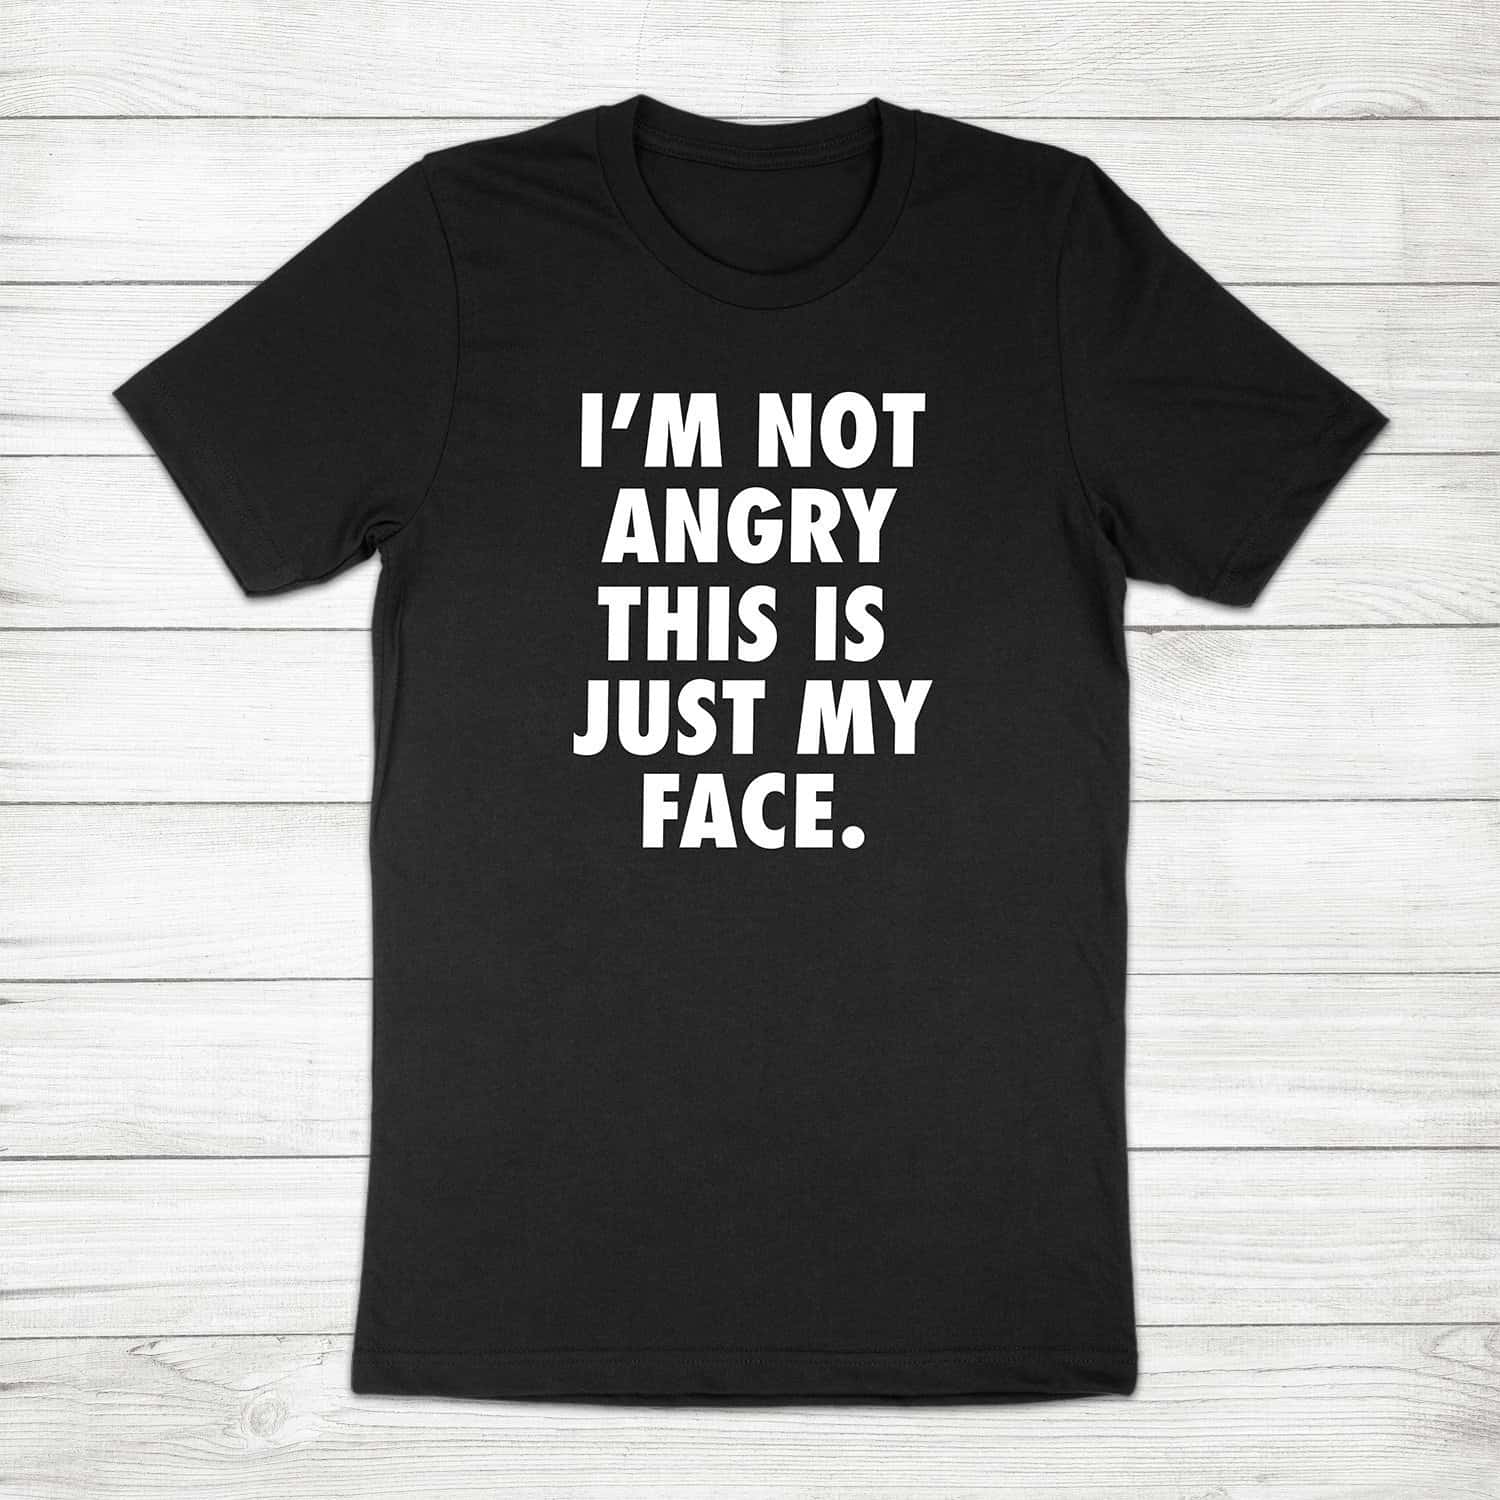 I'm Just a Lil Princess With Anger Issues Kids T-Shirt 